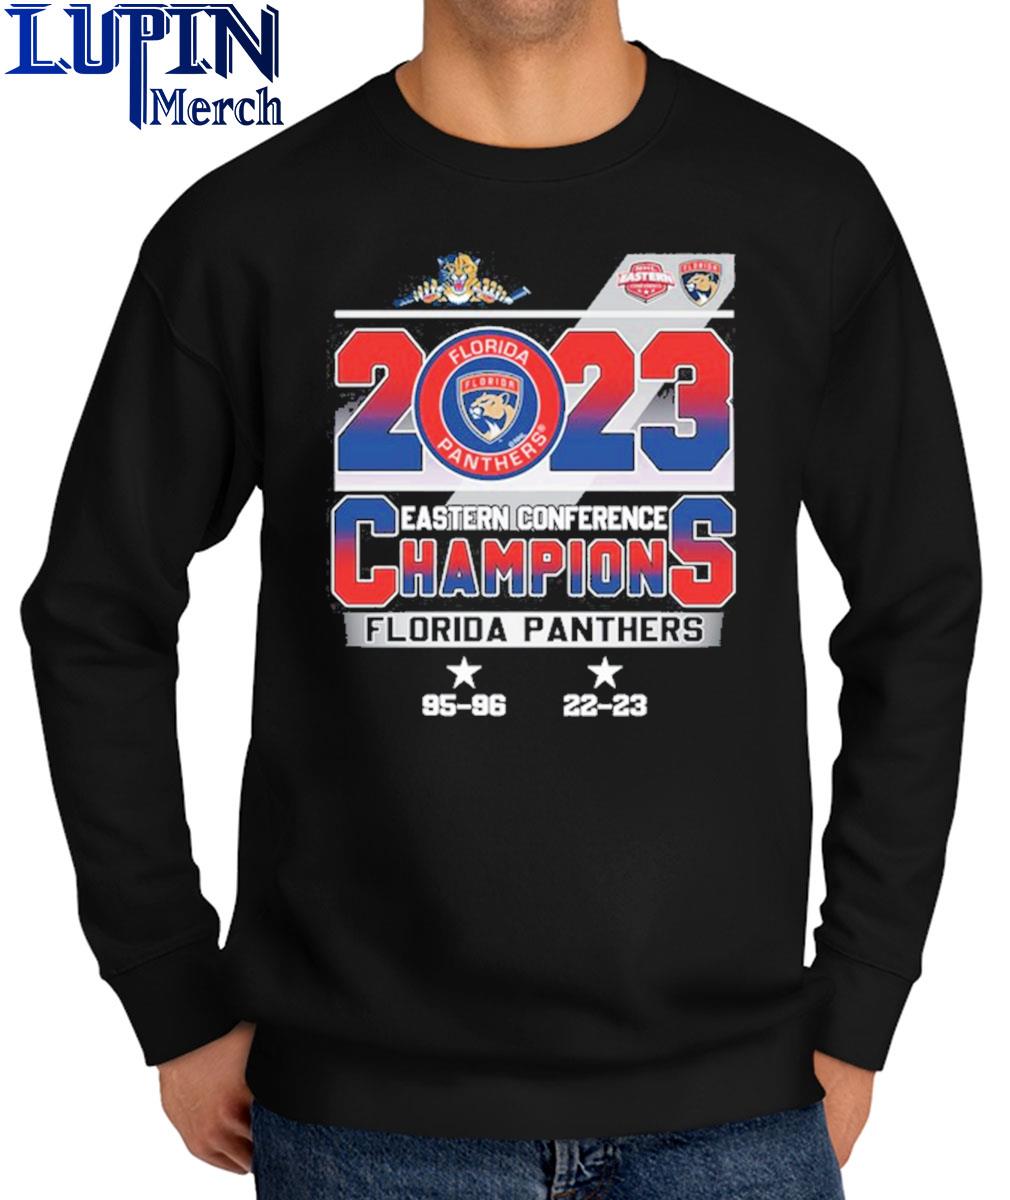 Florida Panthers 2023 Eastern Conference Champions logo T-shirt